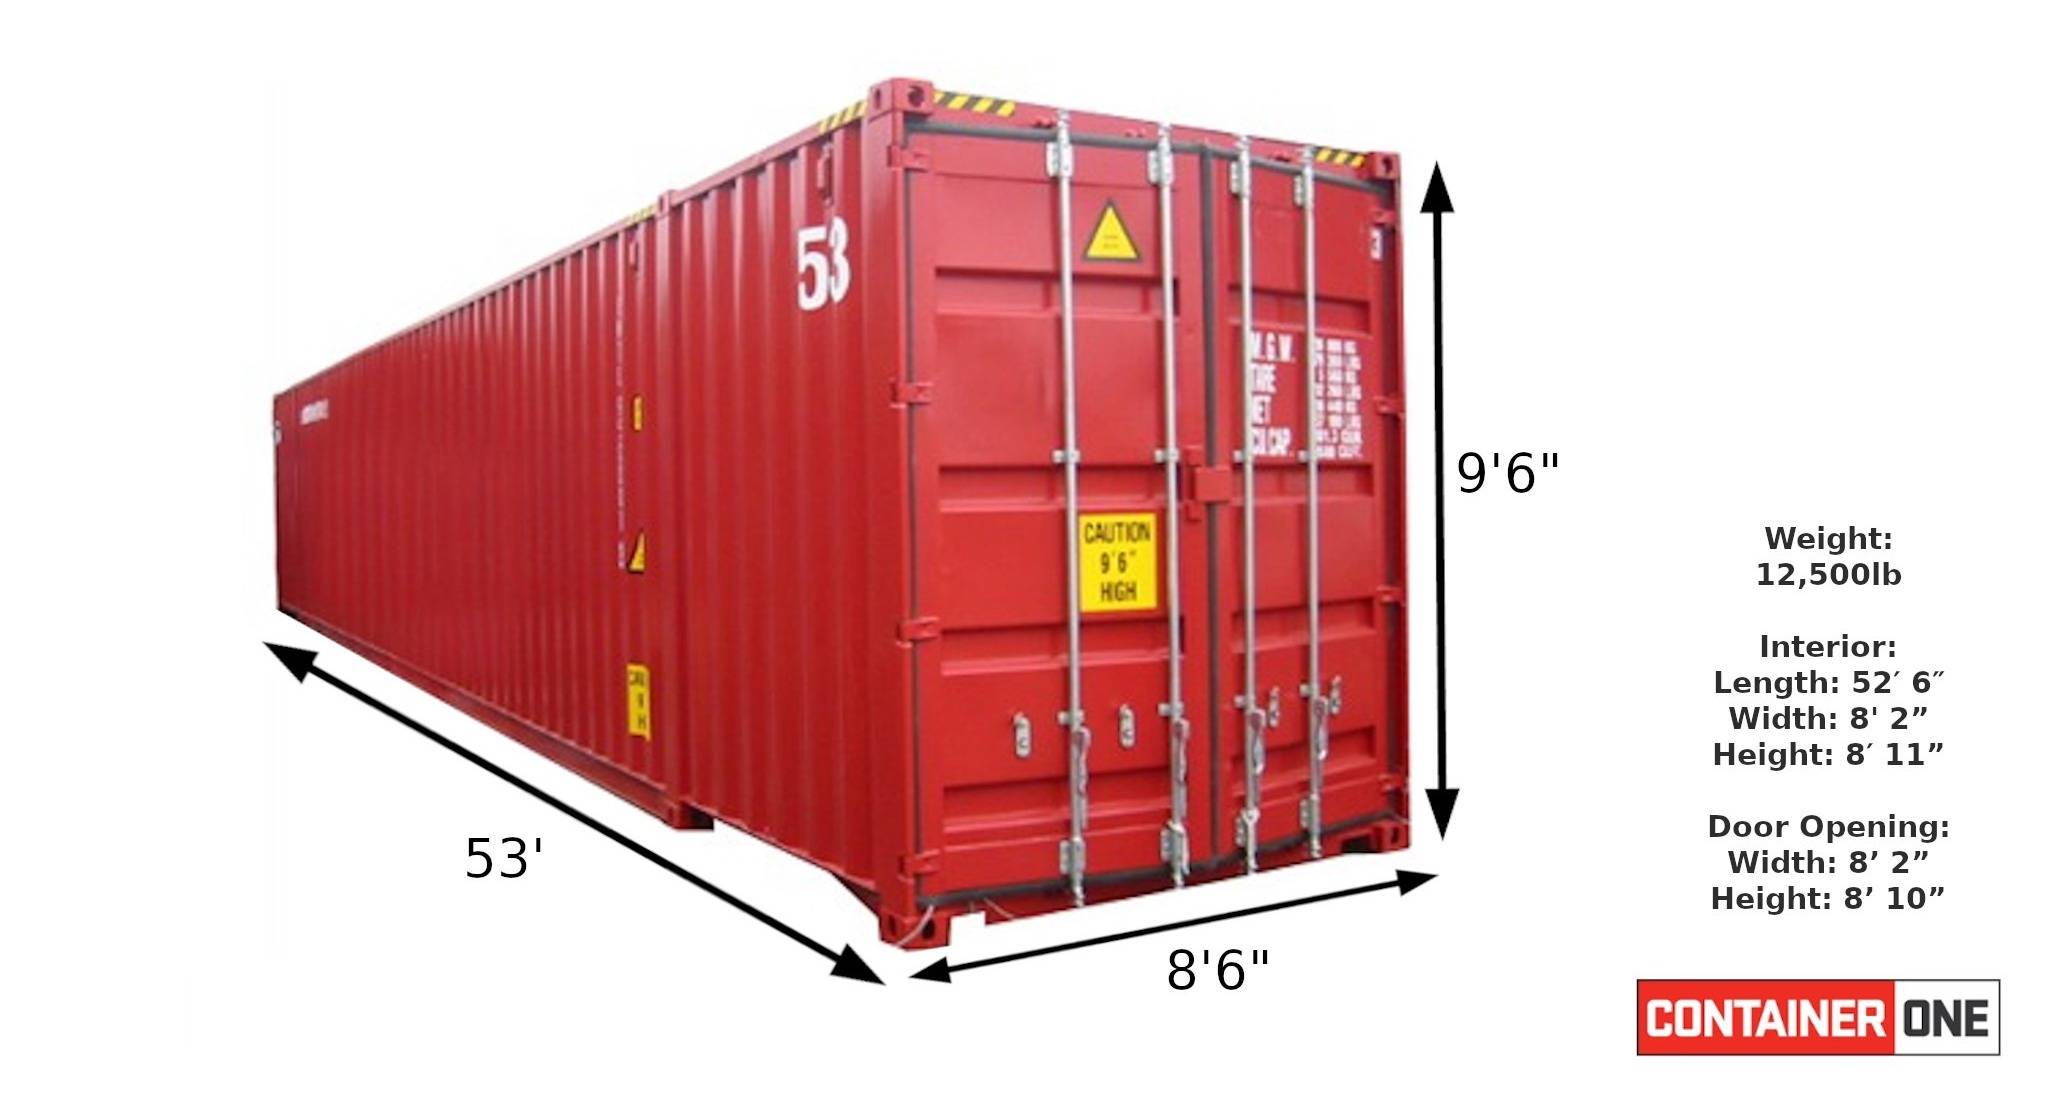 Buy 53 ft shipping container online